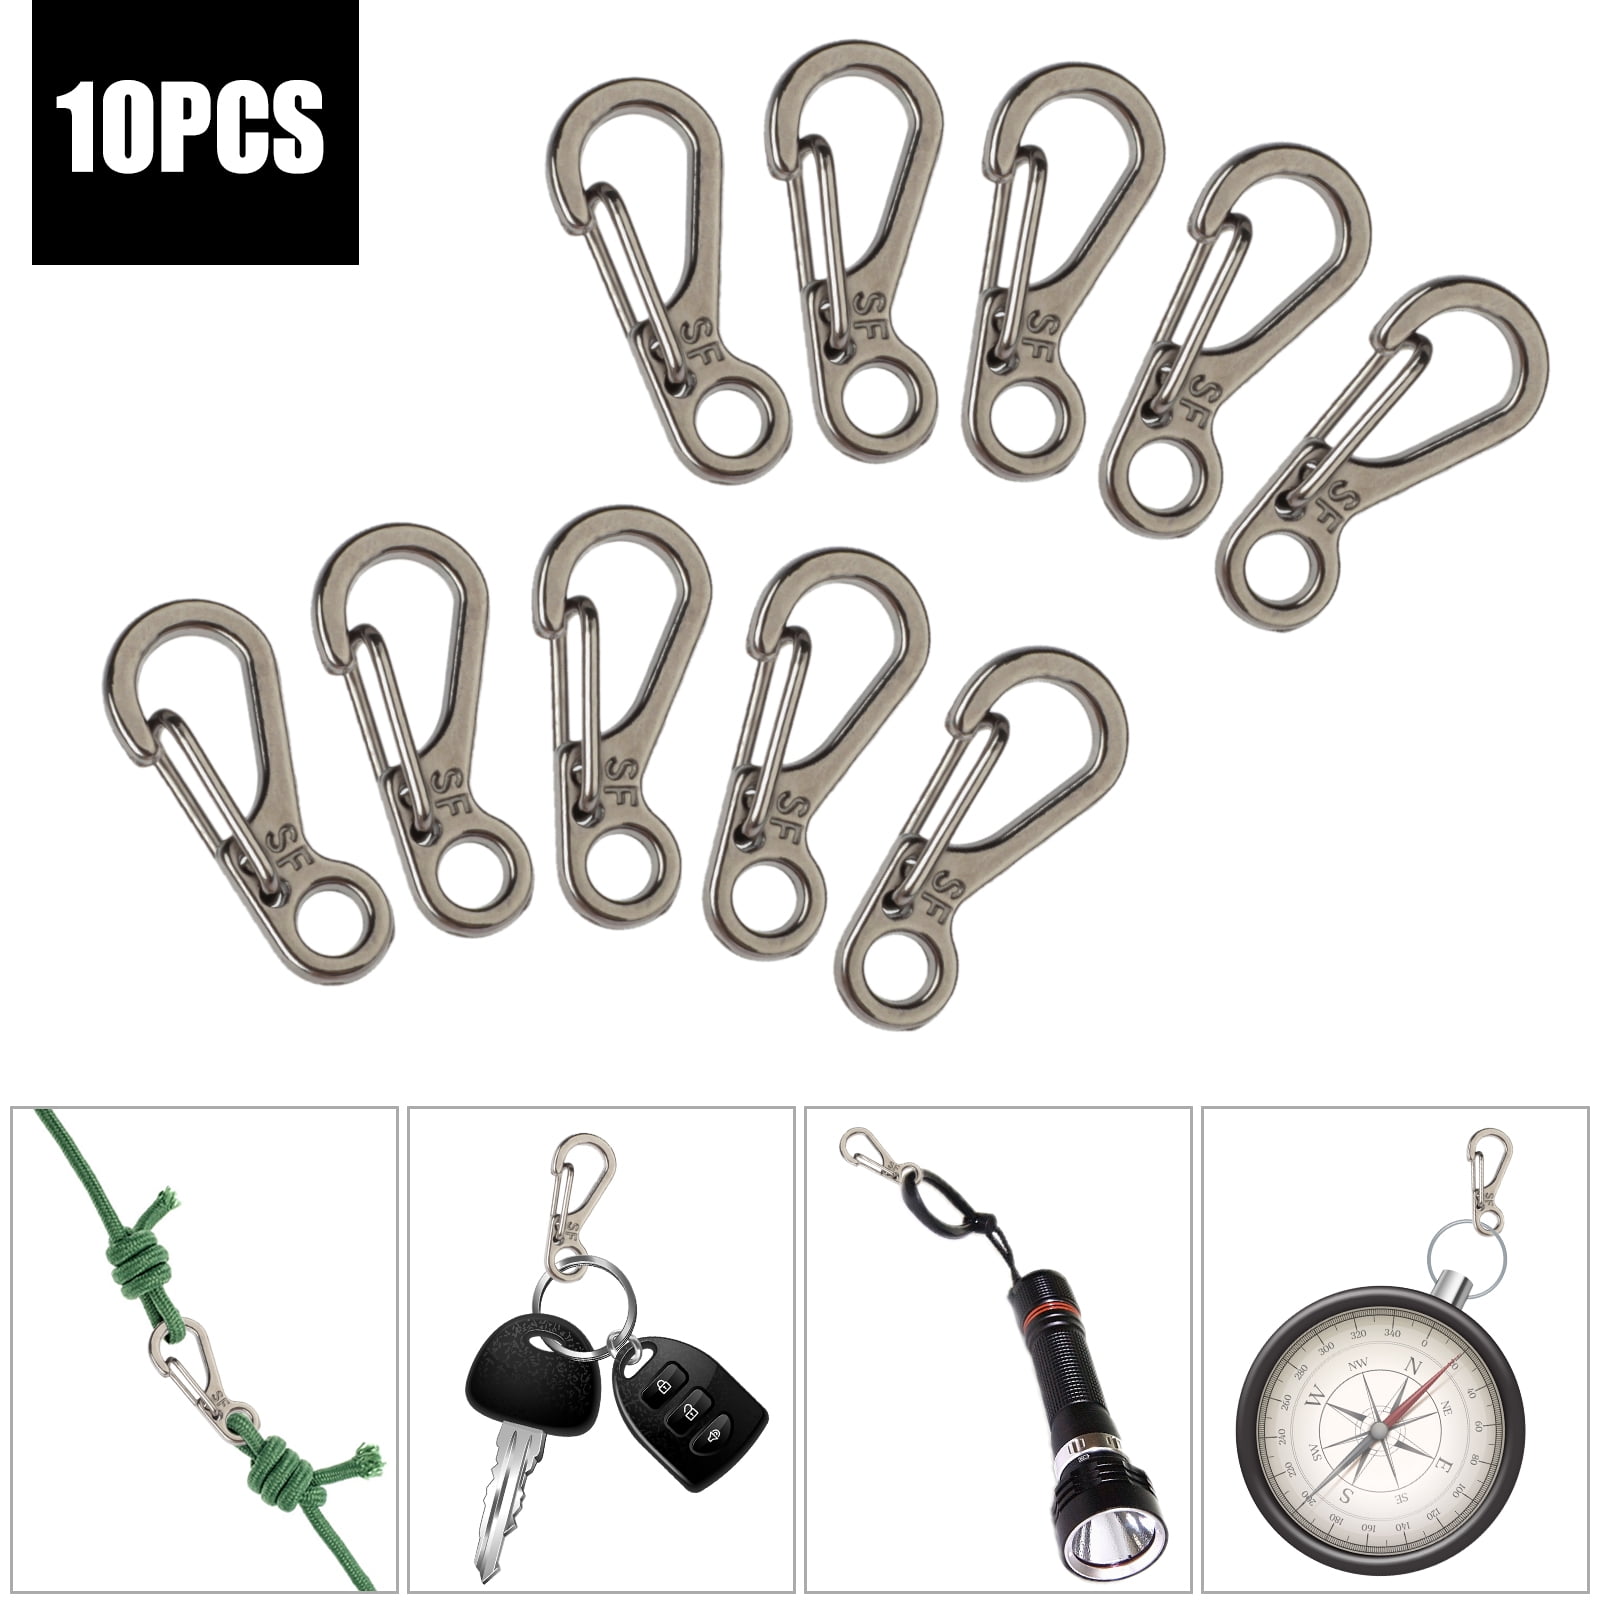 10pcs Mini SF Metal Carabiner Clips Tiny Snap Hooks Buckle Spring Clasp Keychain 